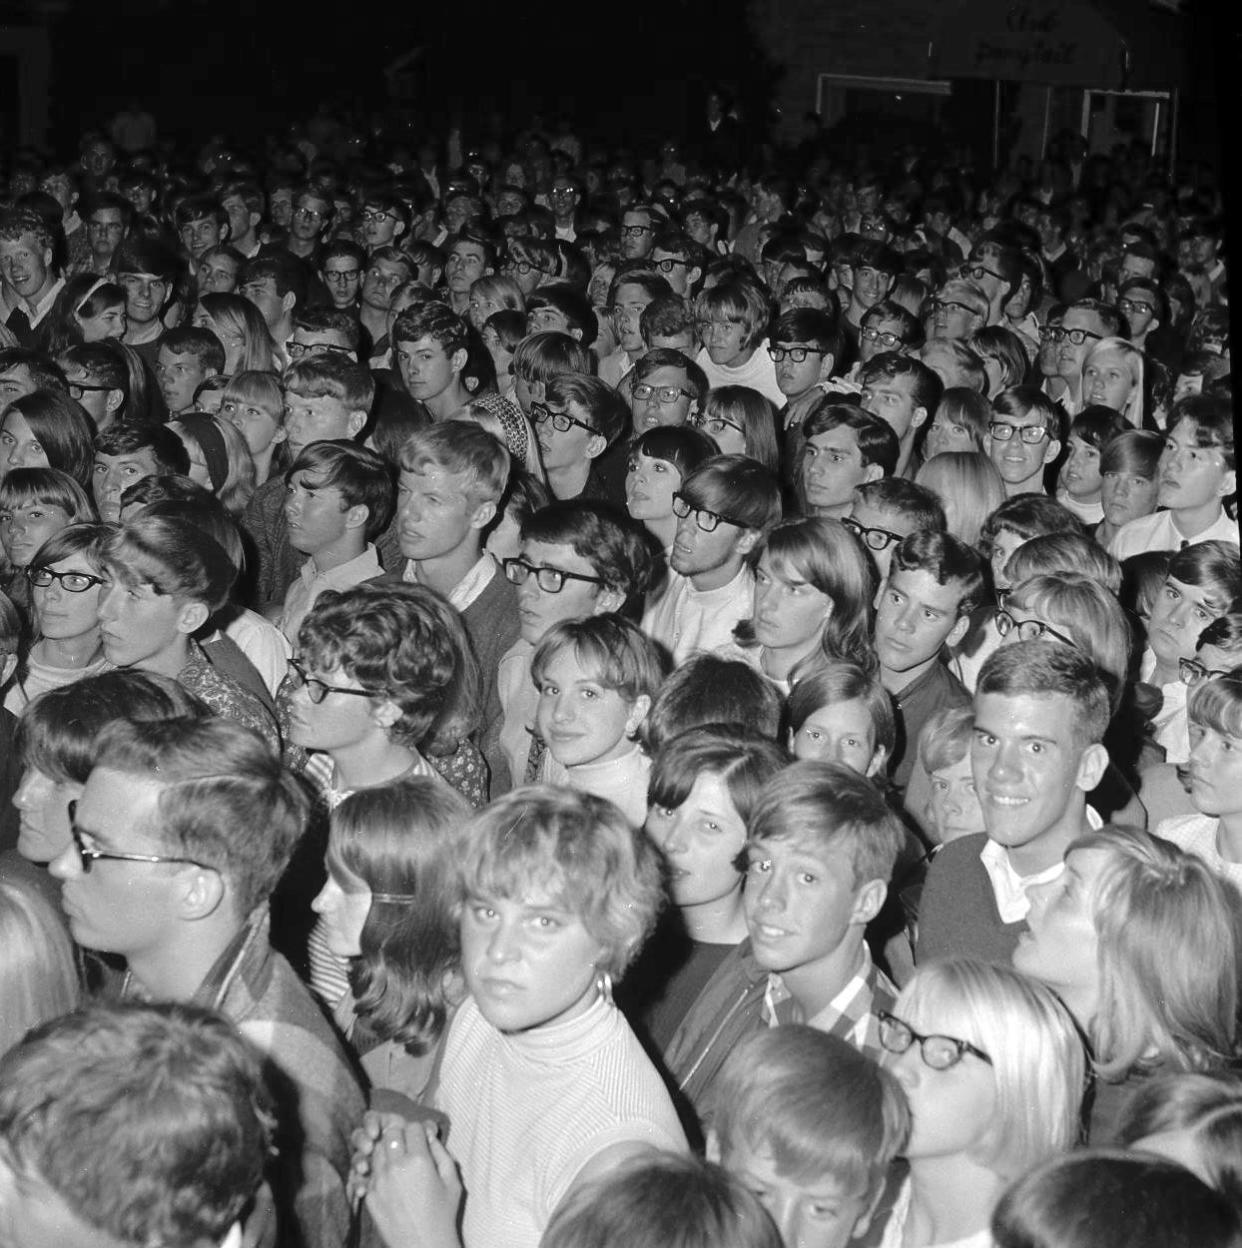 A photo of the crowd at Club Ponytail when The Animals performed there.